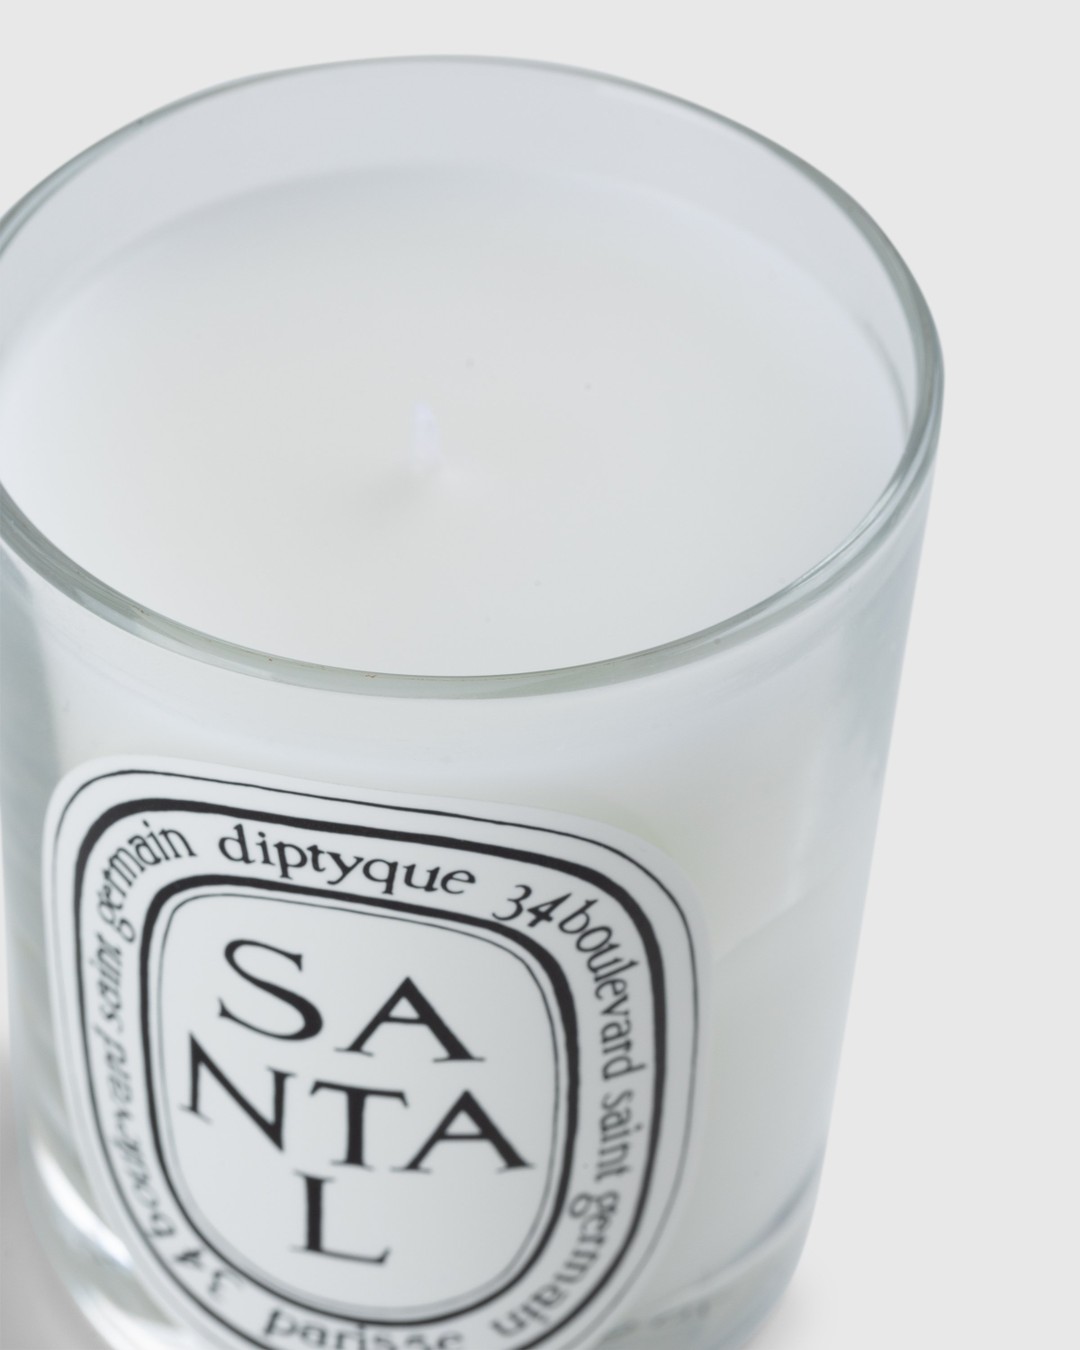 Diptyque – Standard Candle Santal 190g - Candles - White - Image 2